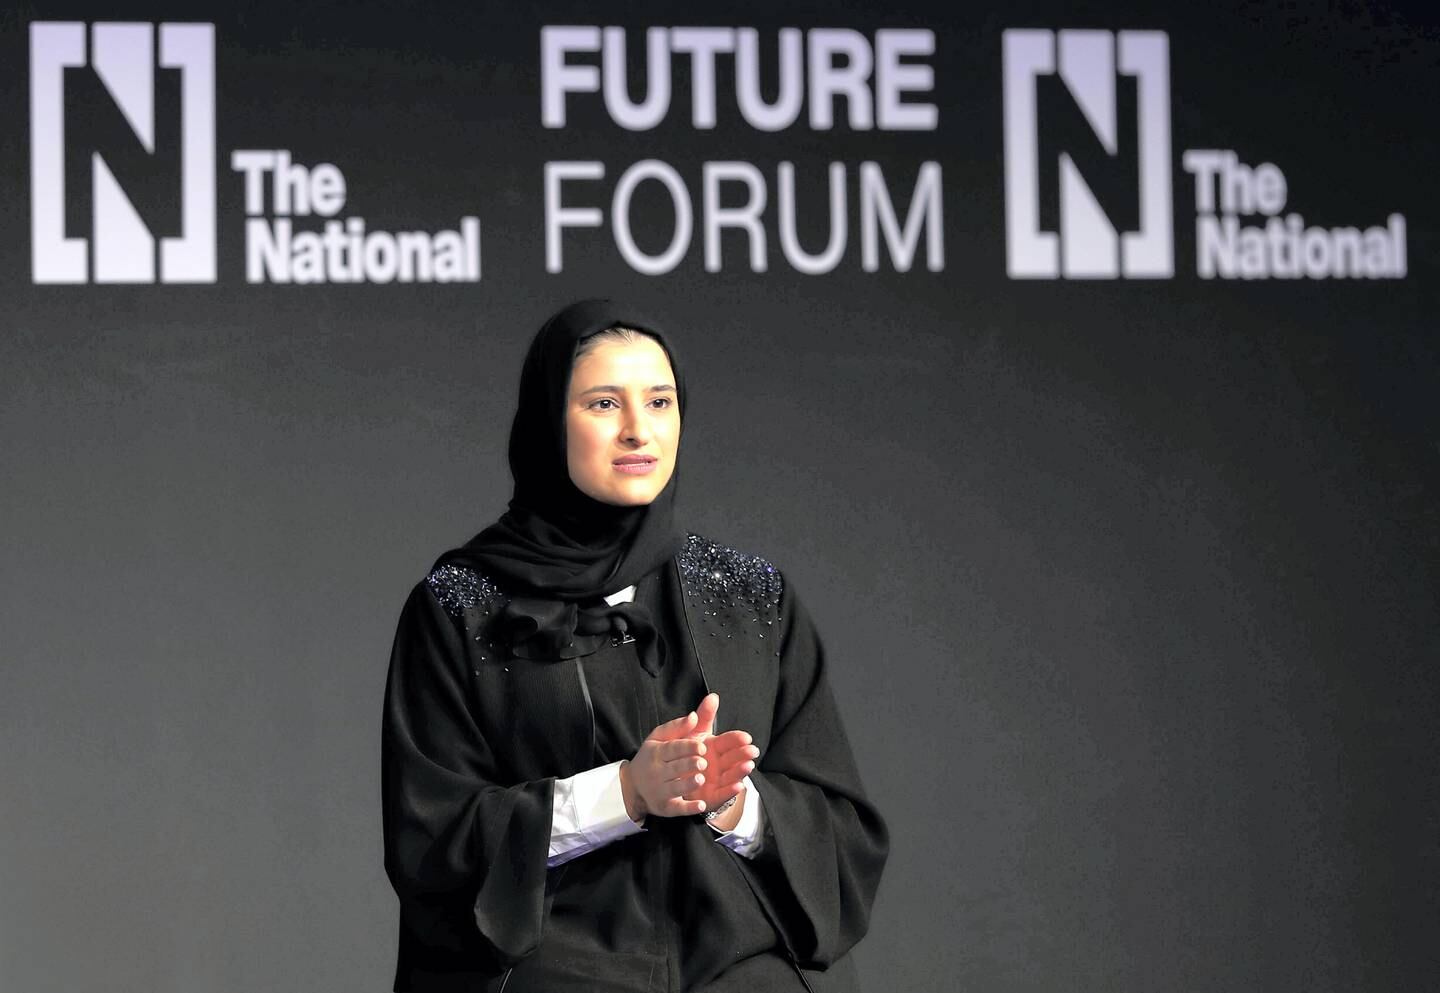 Abu Dhabi, United Arab Emirates - May 8th, 2018: Her Excellency Sarah bint Yousif Al Amiri Minister of State for Advanced Sciences at The National's Future Forum. Tuesday, May 8th, 2018 at Cleveland Clinic, Abu Dhabi. Chris Whiteoak / The National